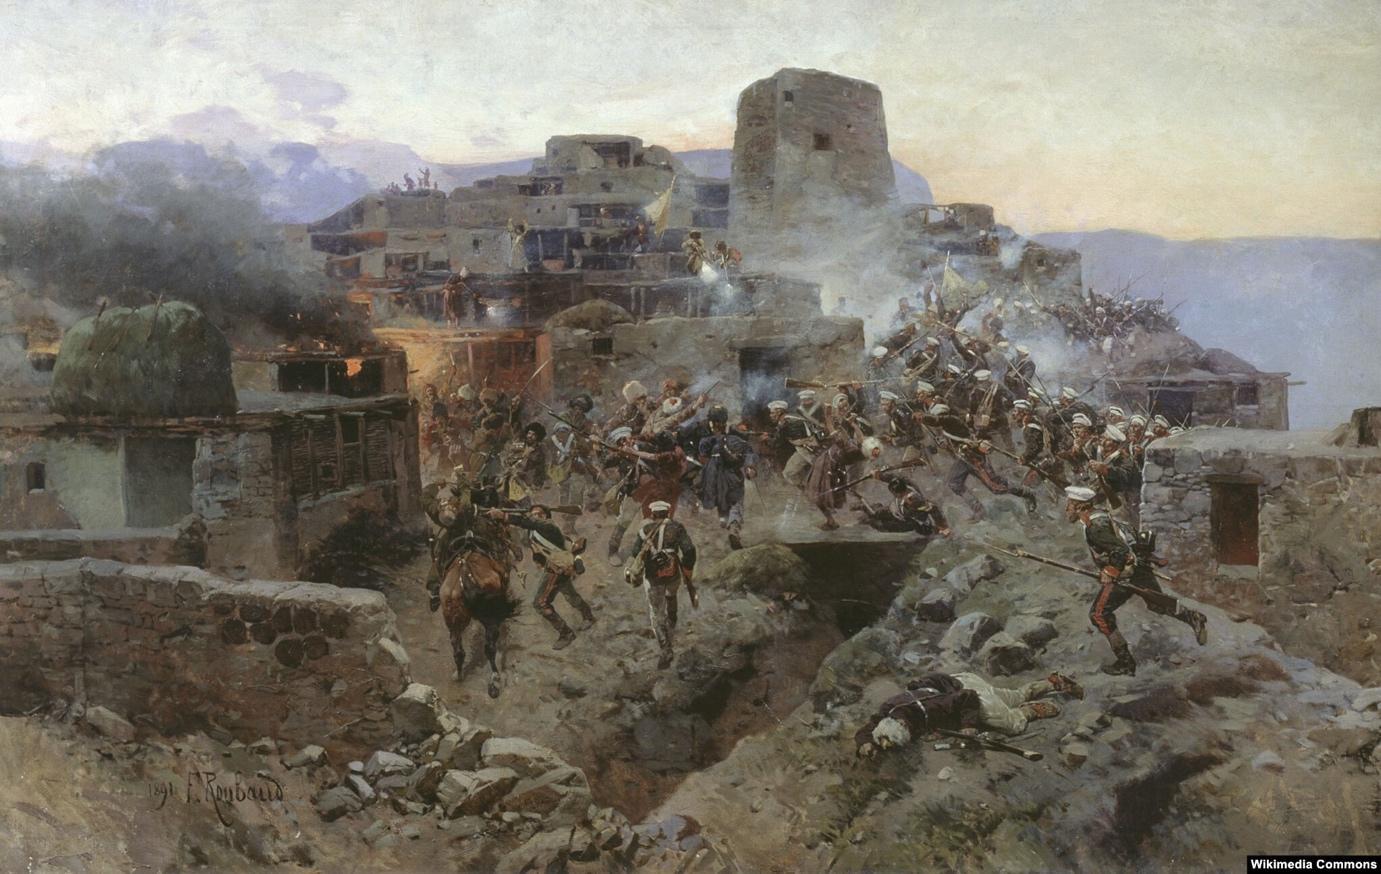 “Assault on the aul of Gimry by Russian troops in 1832”, by F. Roubaud